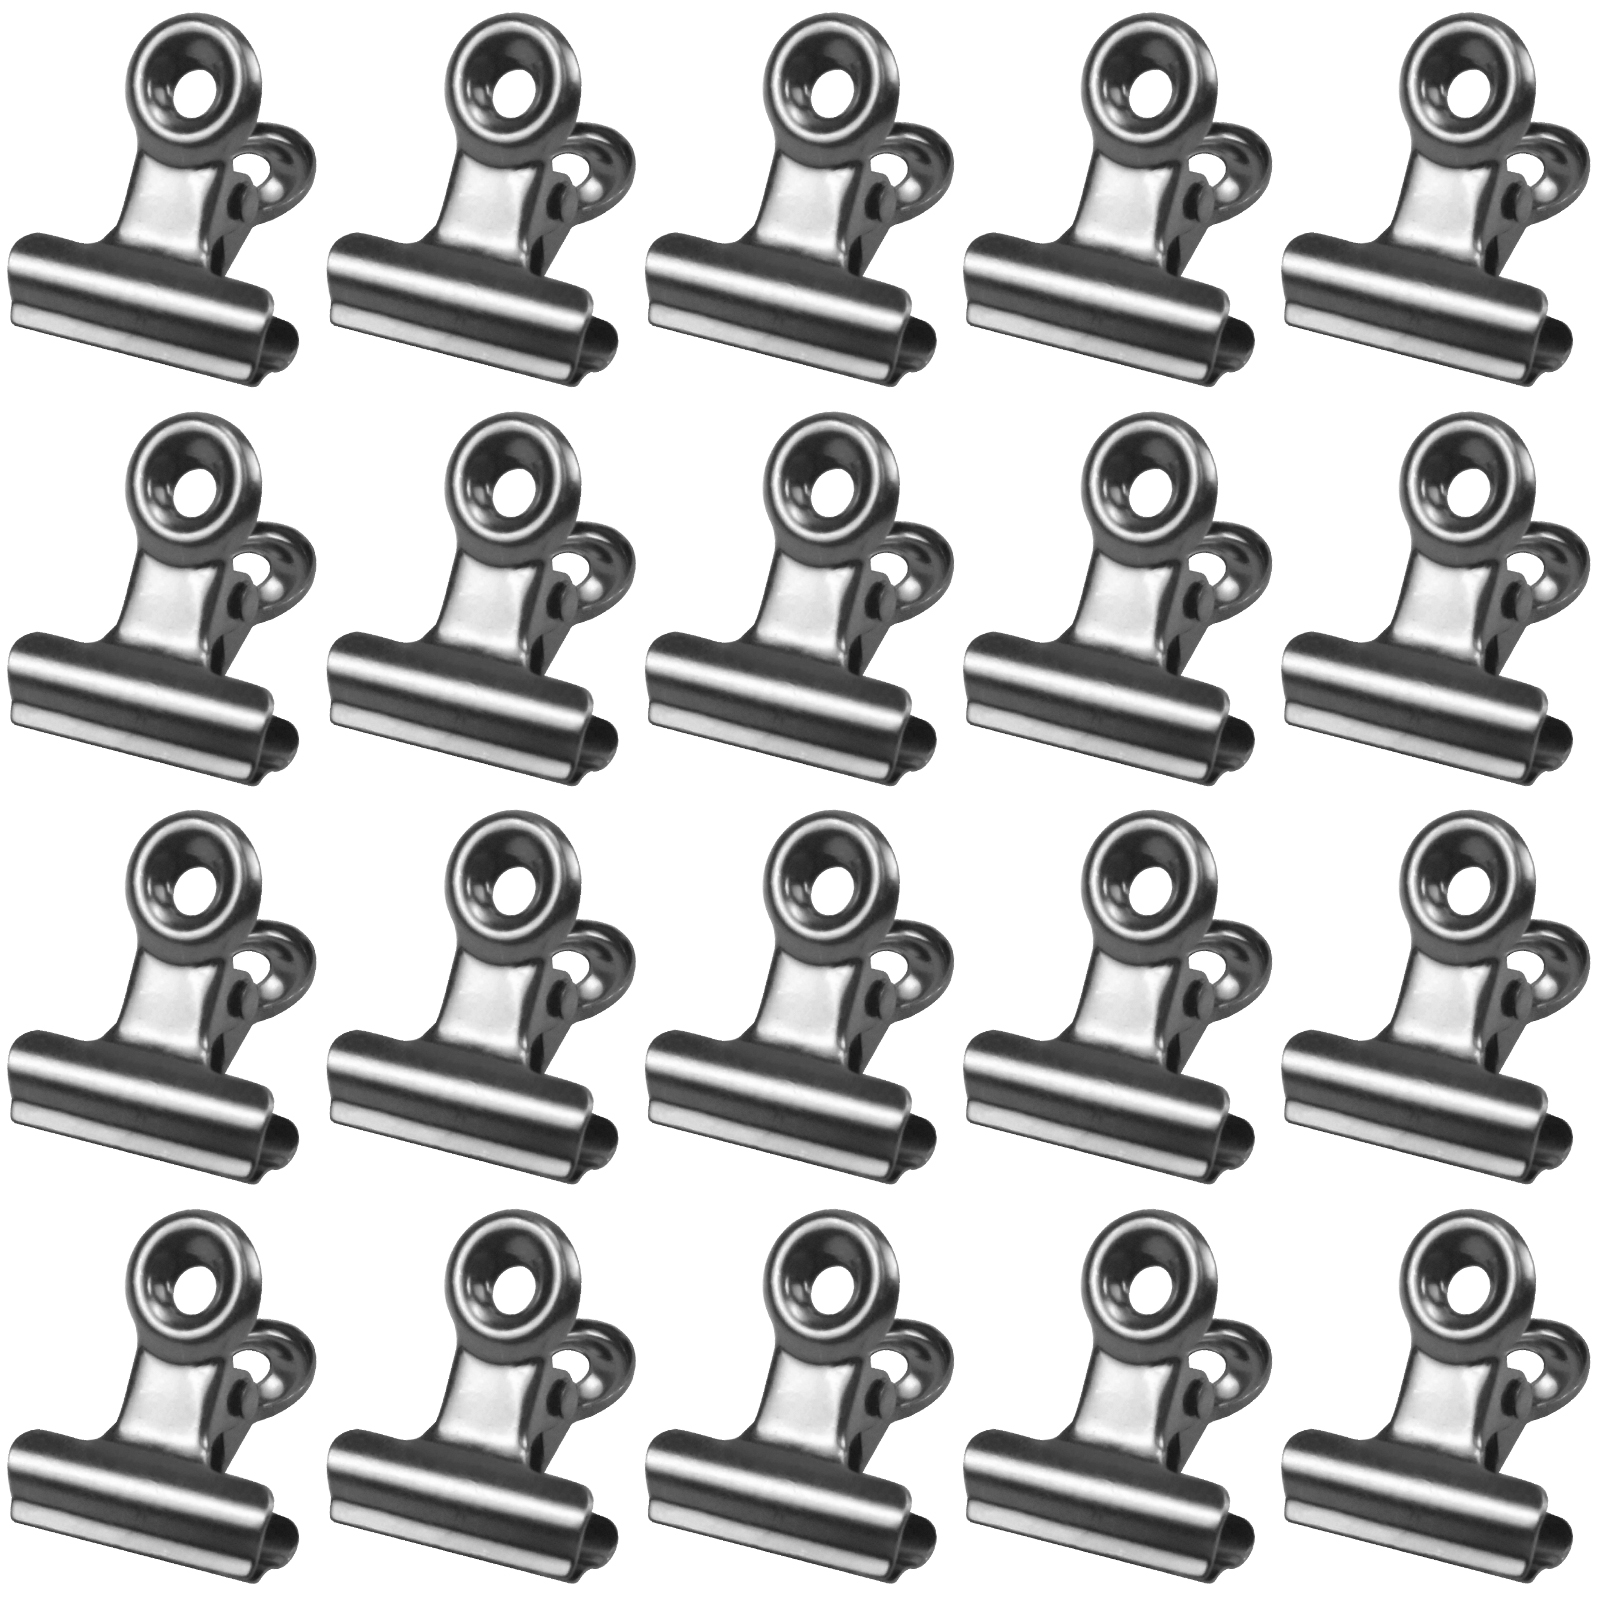 Stainless Steel Clips File Clamps Paper Clip Stainless Steel File Clamps  For Crafts Bags Drawings Photos For Home Kitchen & Office Useage Home O -z